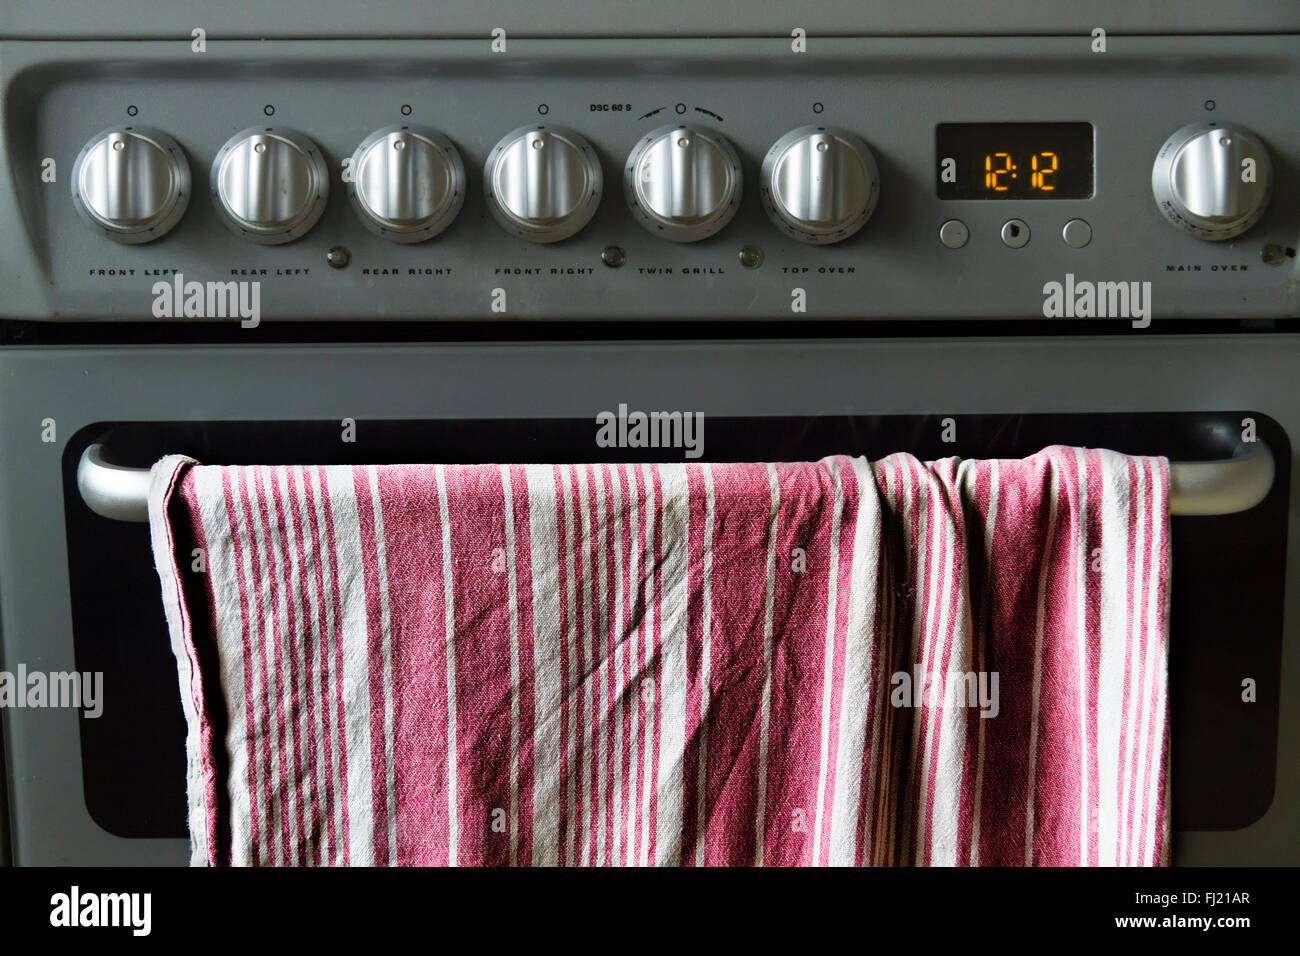 Tea towel or drying cloth hanging on an oven door handle of a